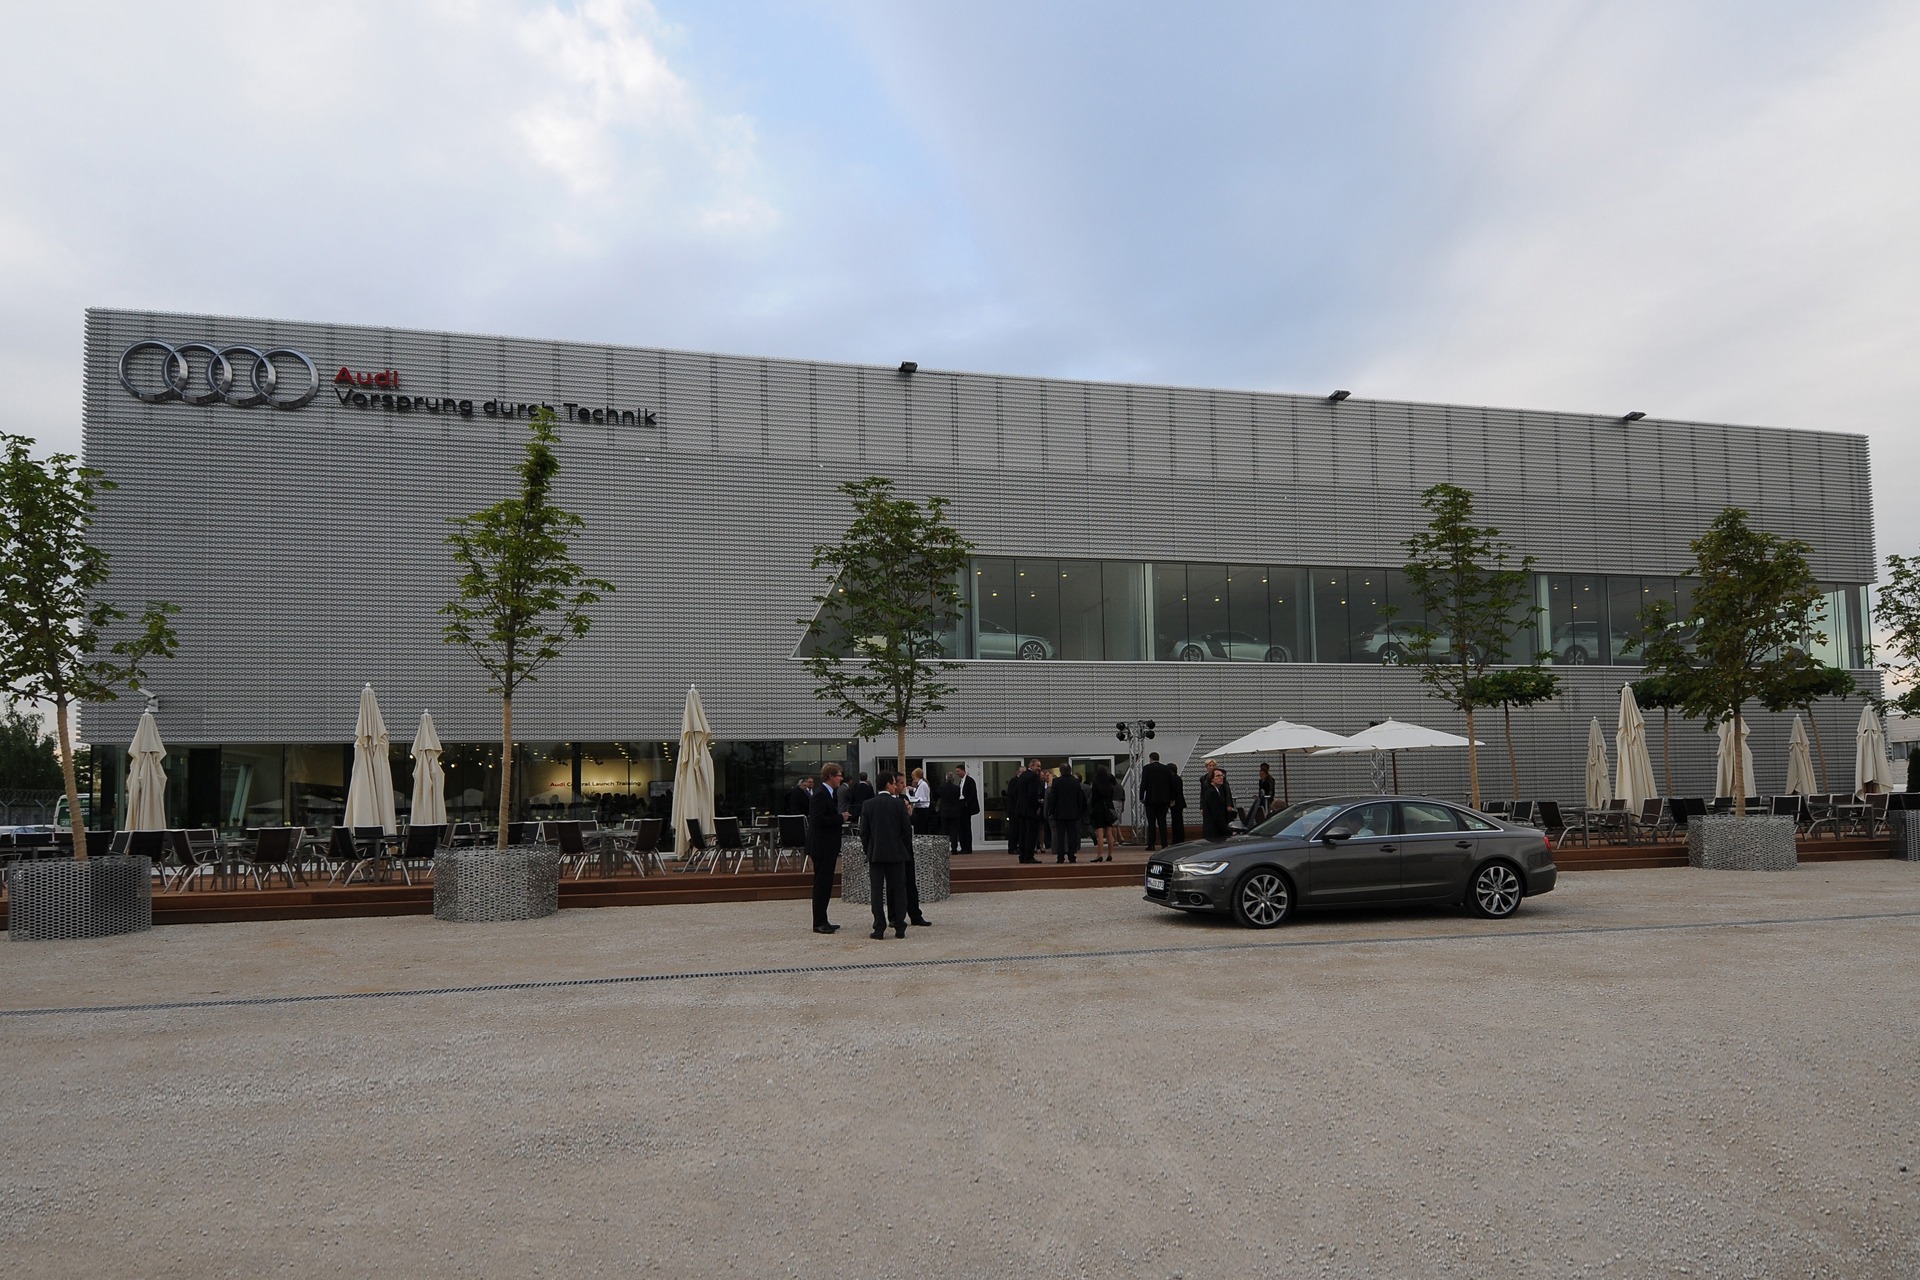 Read more about the article Audi training center at Munich airport